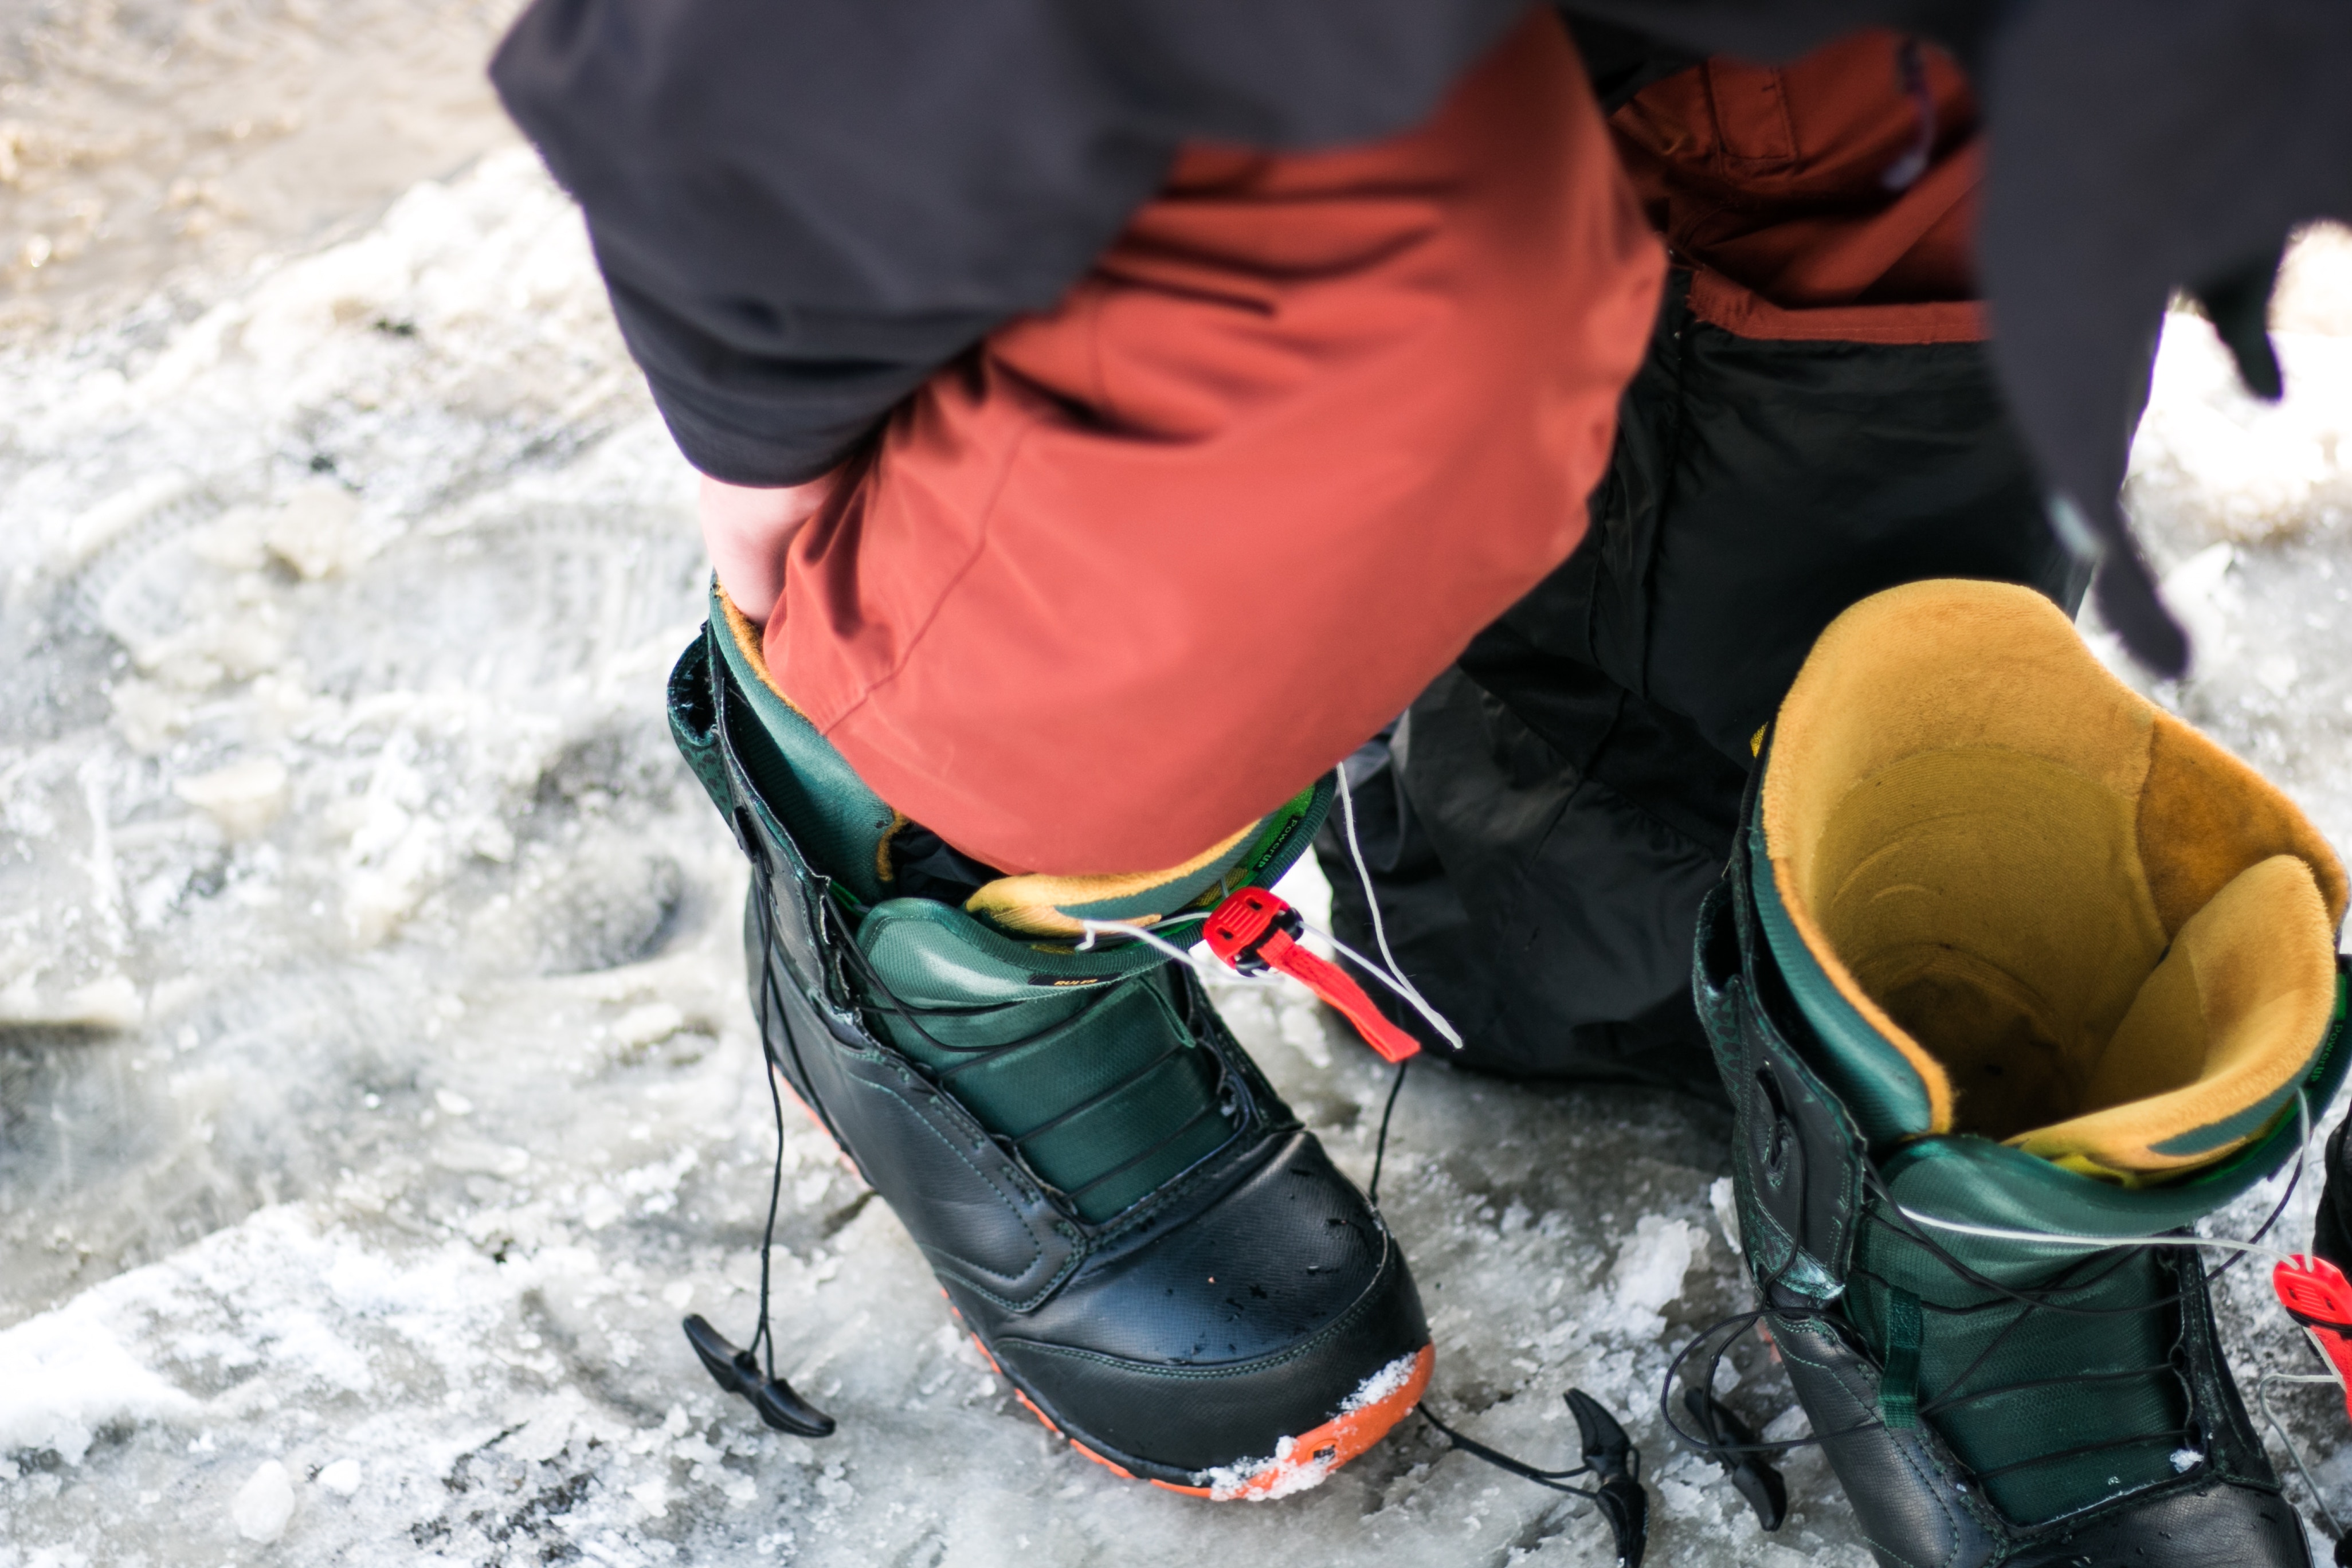 Comfortable boots make all the difference, whether you ski or board.